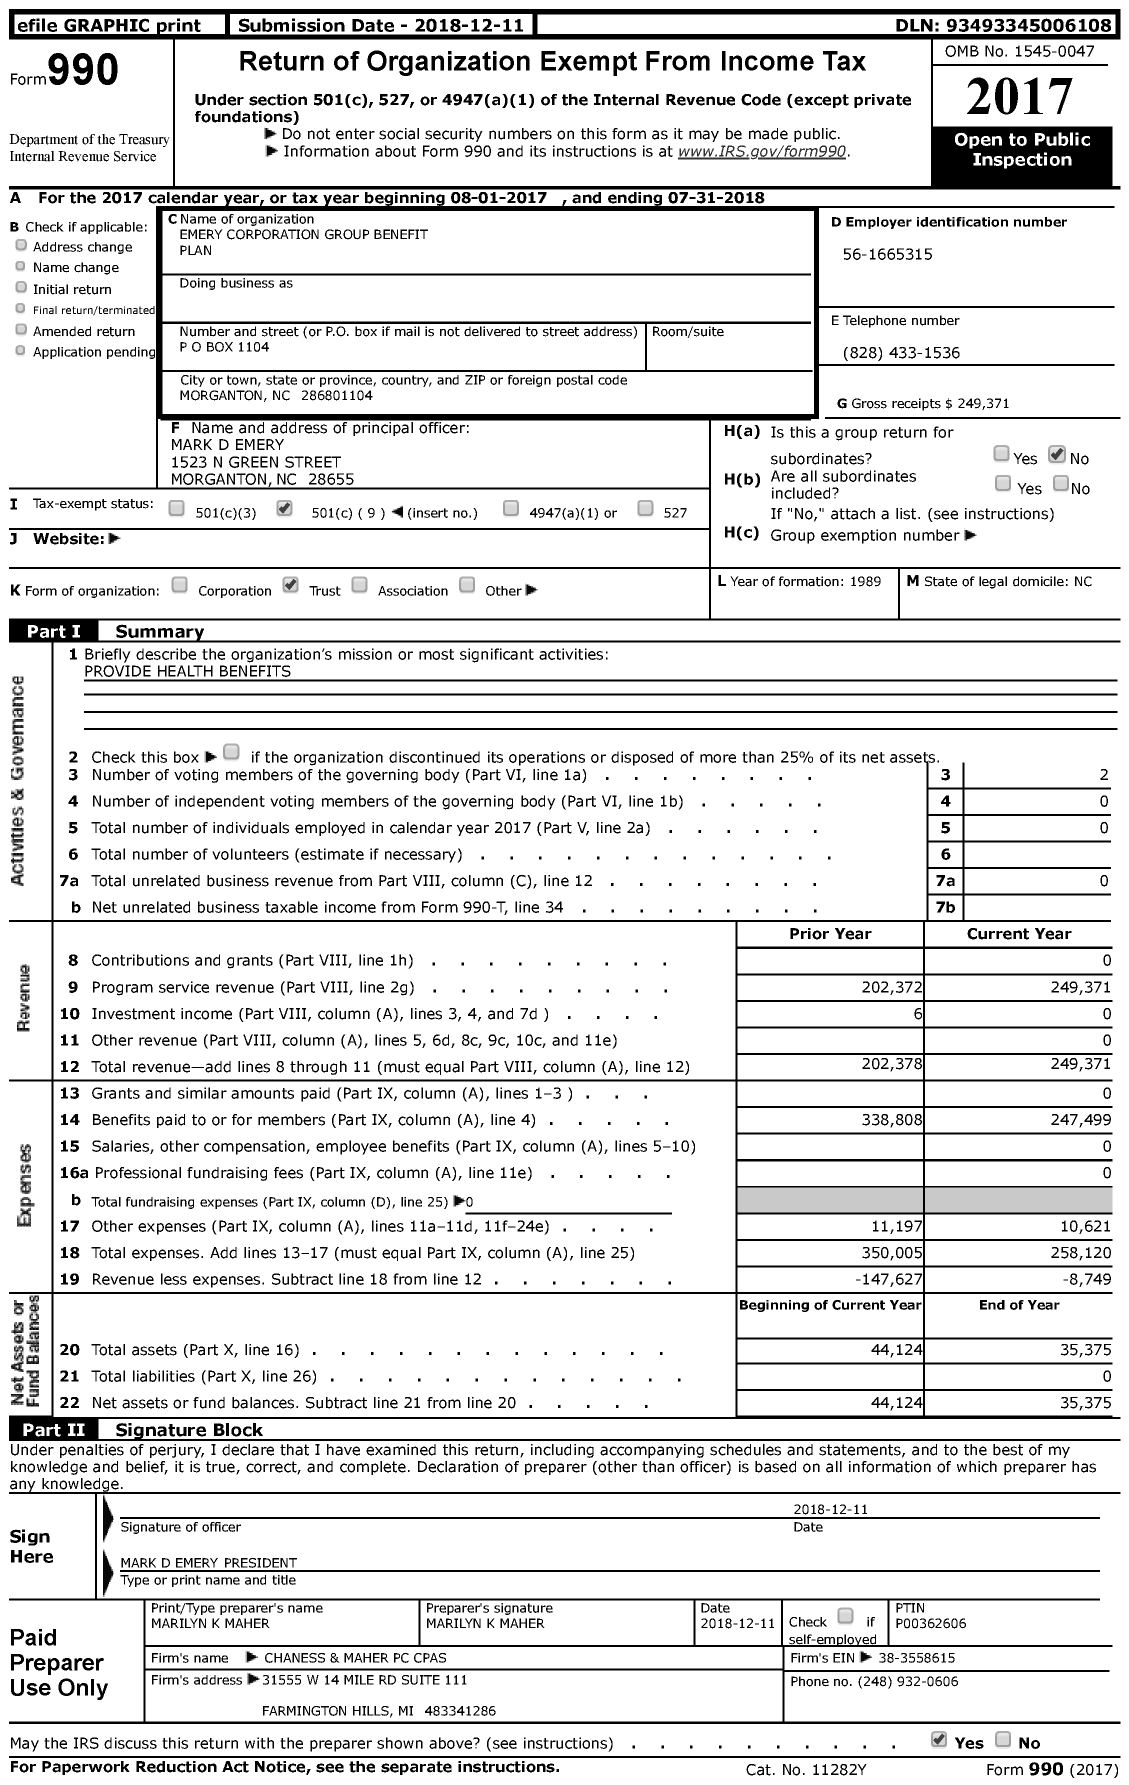 Image of first page of 2017 Form 990 for Emery Corporation Group Benefit Plan